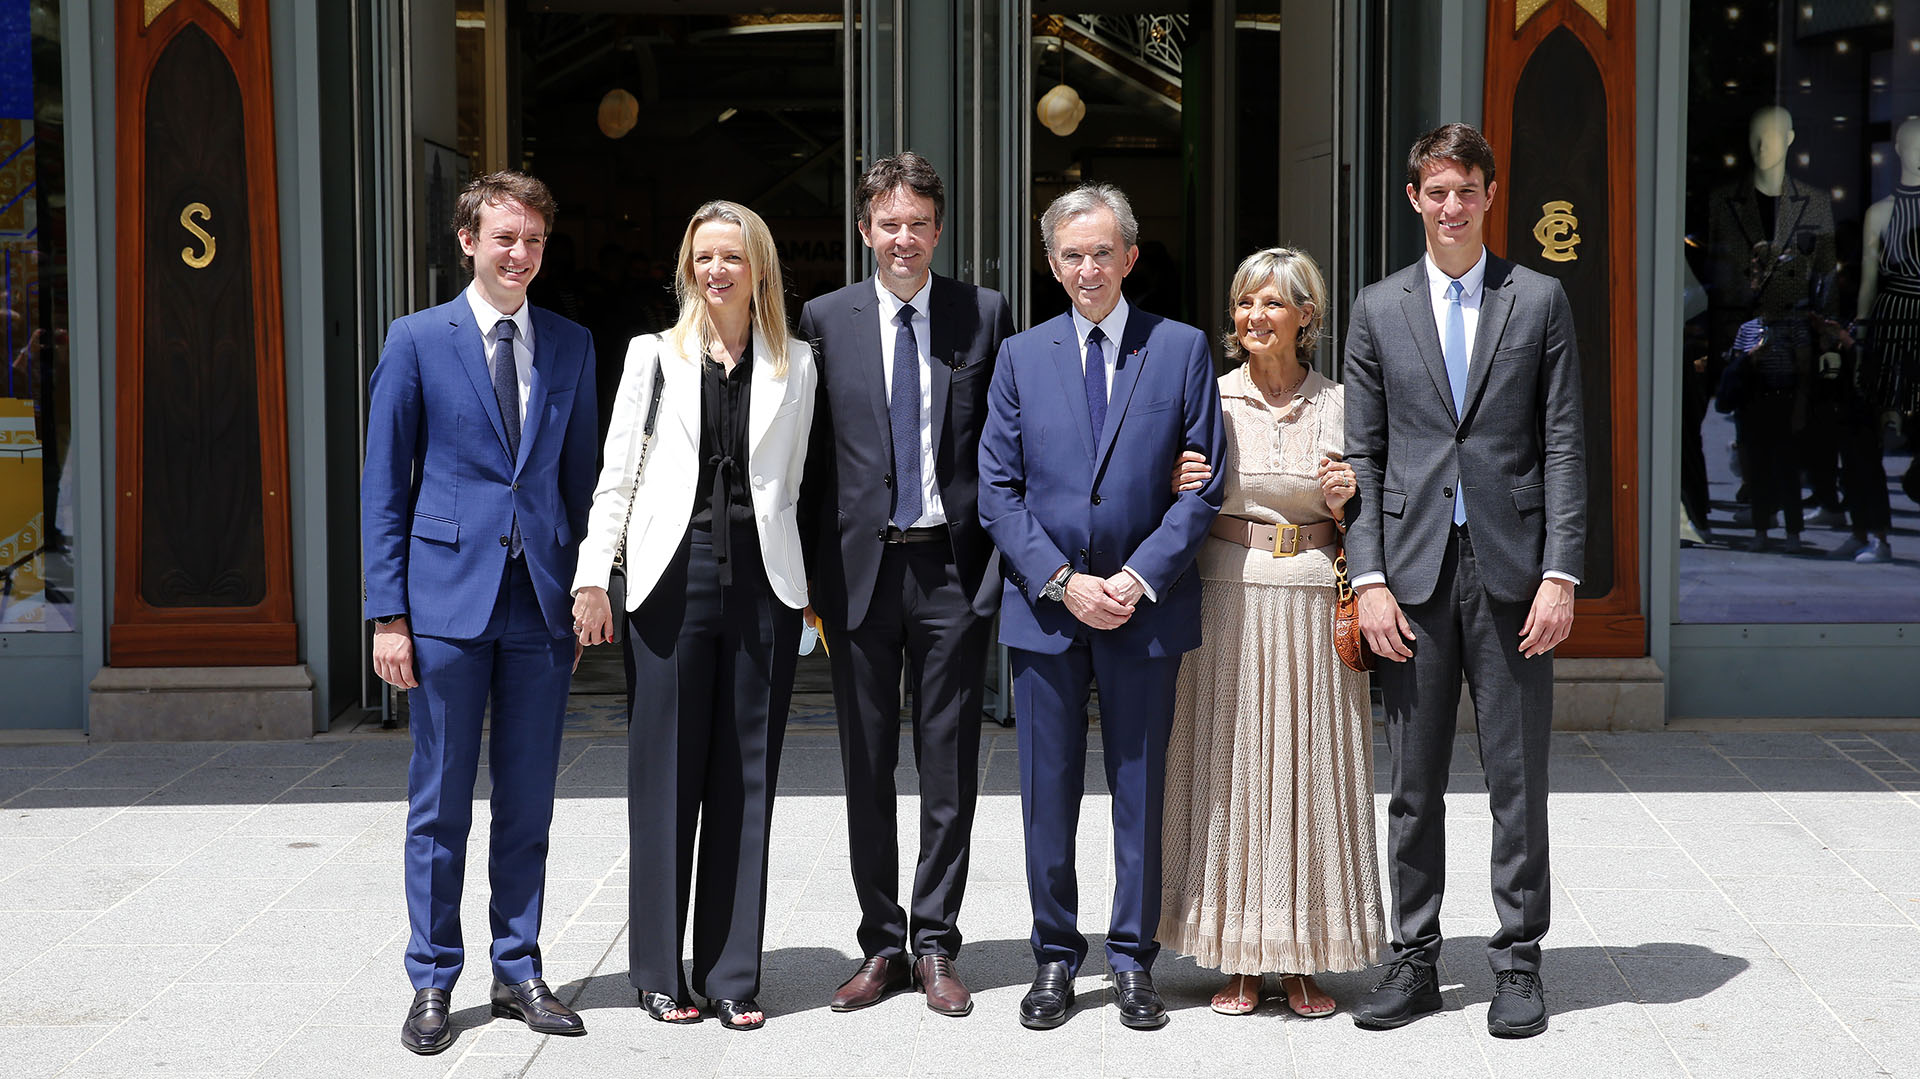 Bernard Arnault (C) and his wife Helene with their children (from left) Frederic Arnault, Delphine Arnault, Antoine Arnault and Alexandre Arnault in an April 2021 photo (Chesnot/Getty Images)